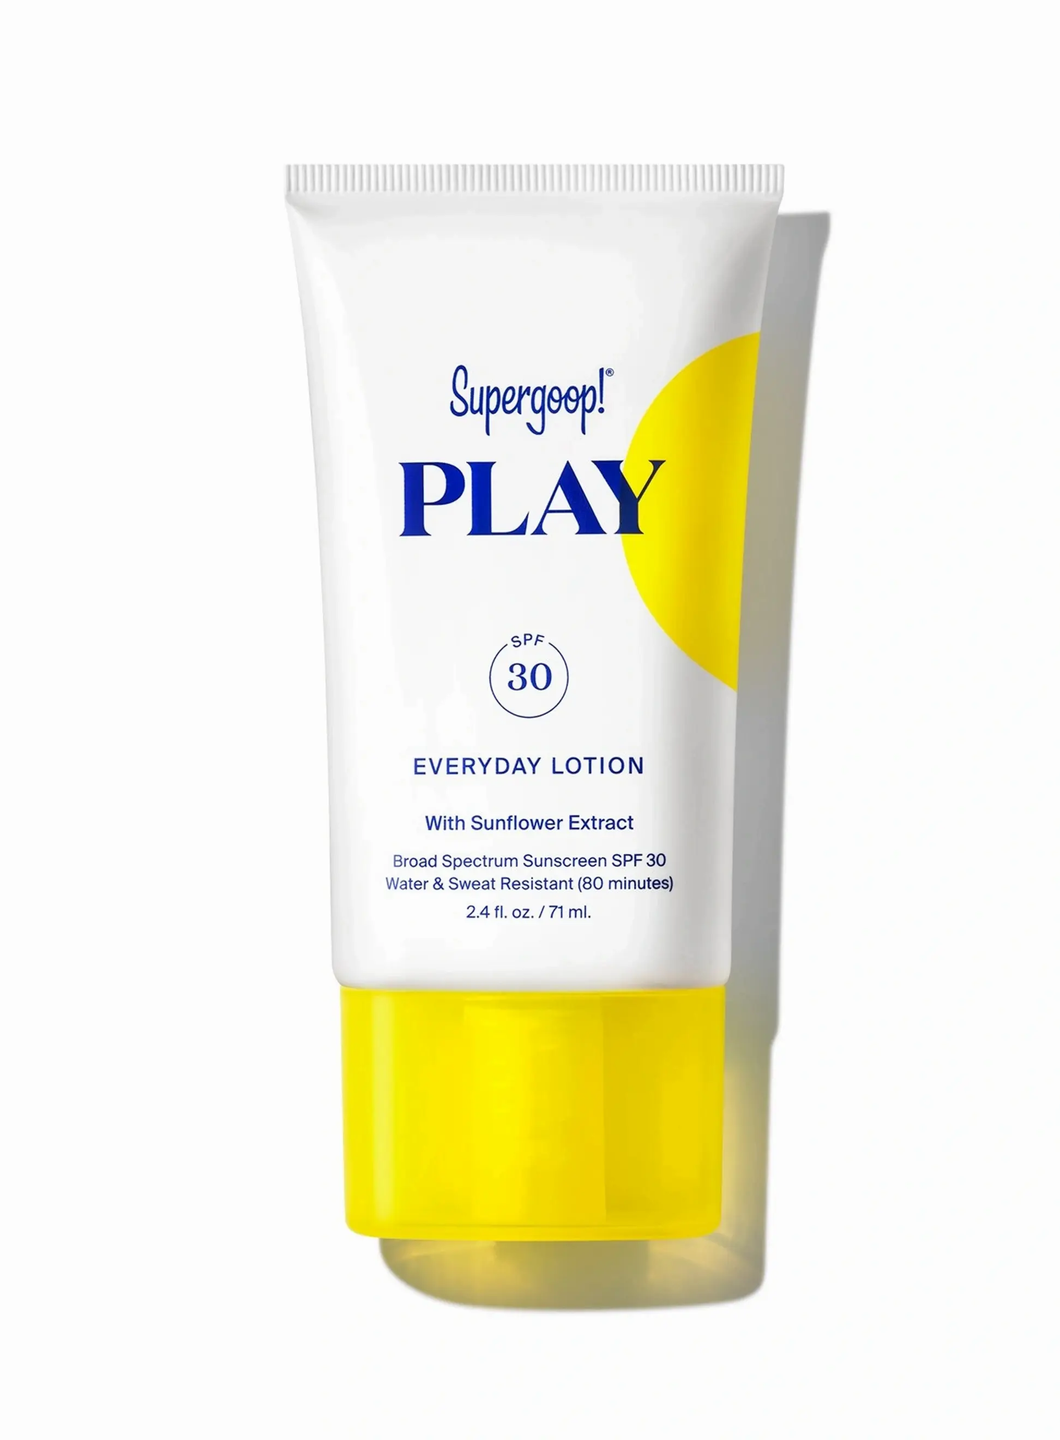 PLAY Everyday Lotion SPF 30 with Sunflower Extract, 2.4oz